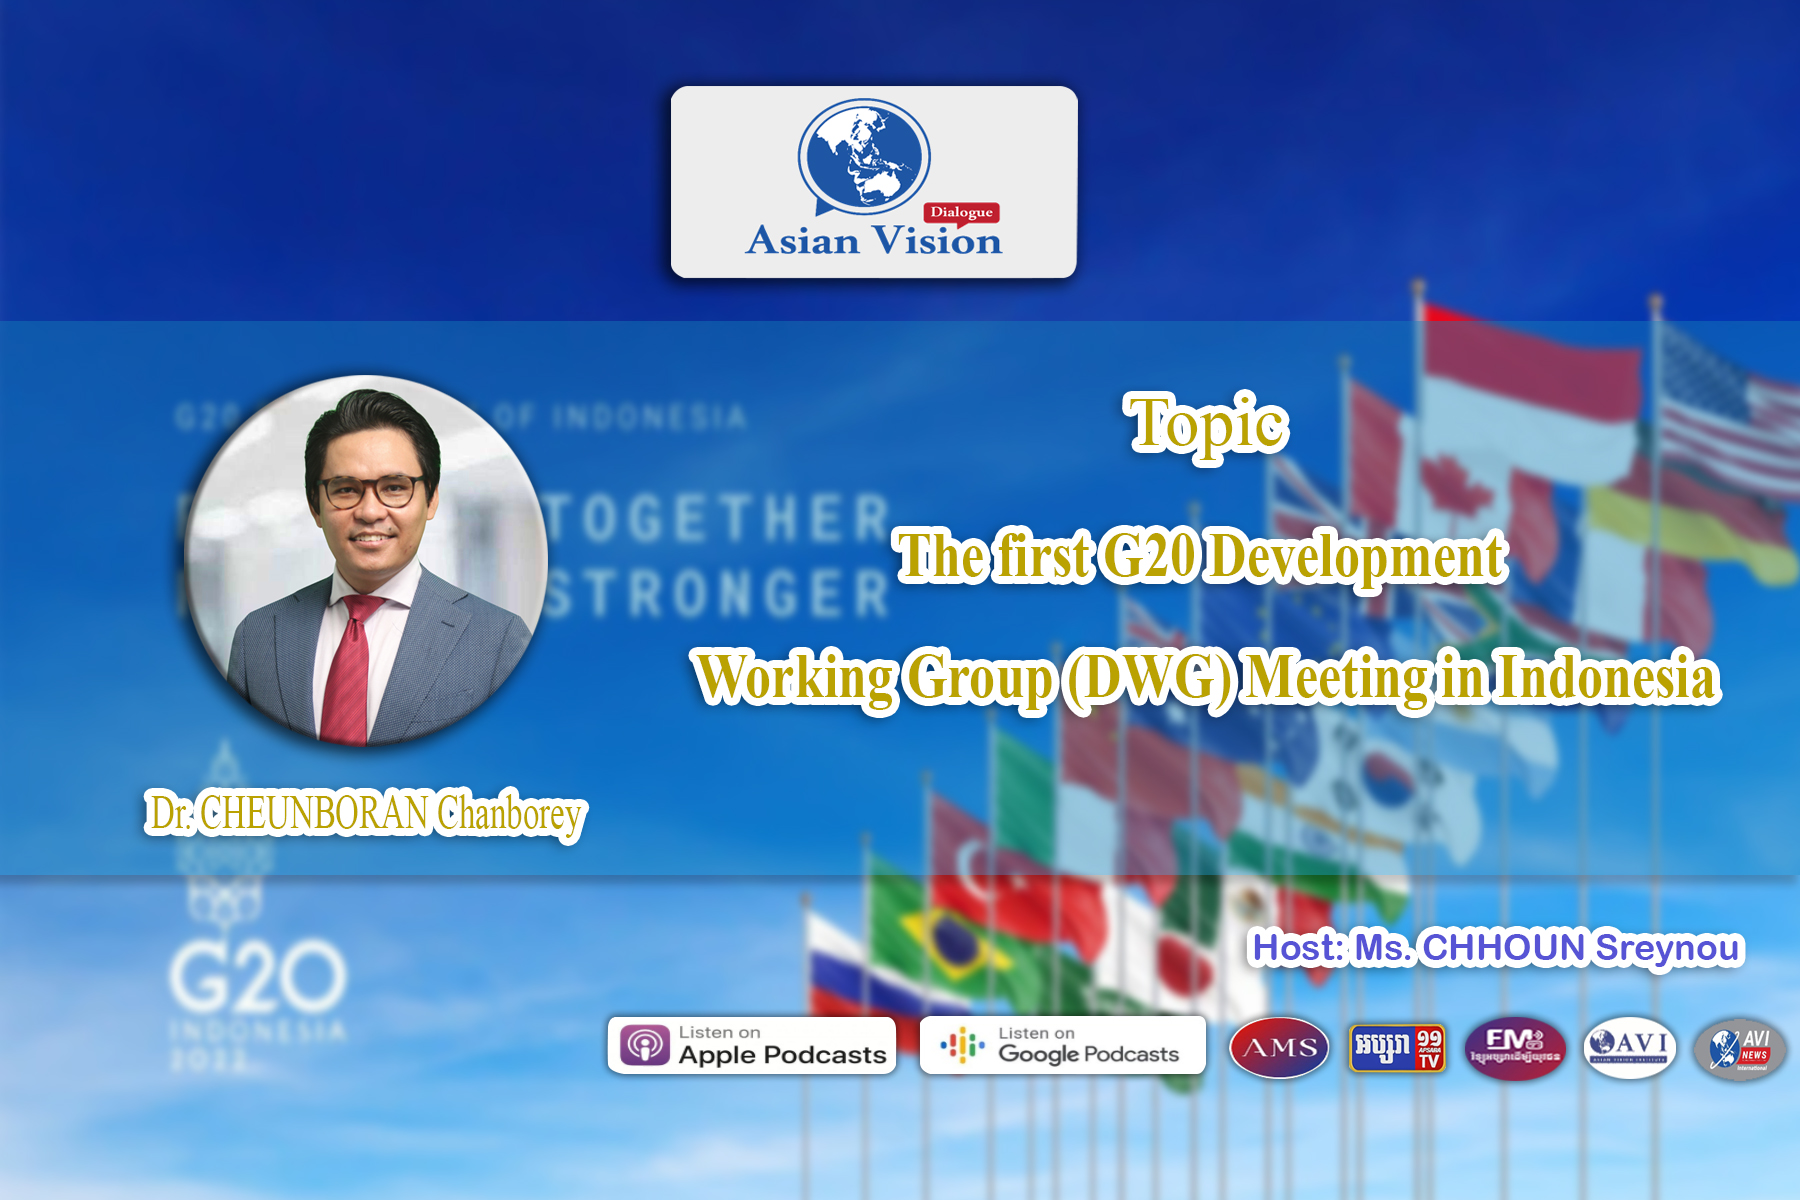 AVD Ep06: The first G20 Development Working Group (DWG) Meeting in Indonesia ￼